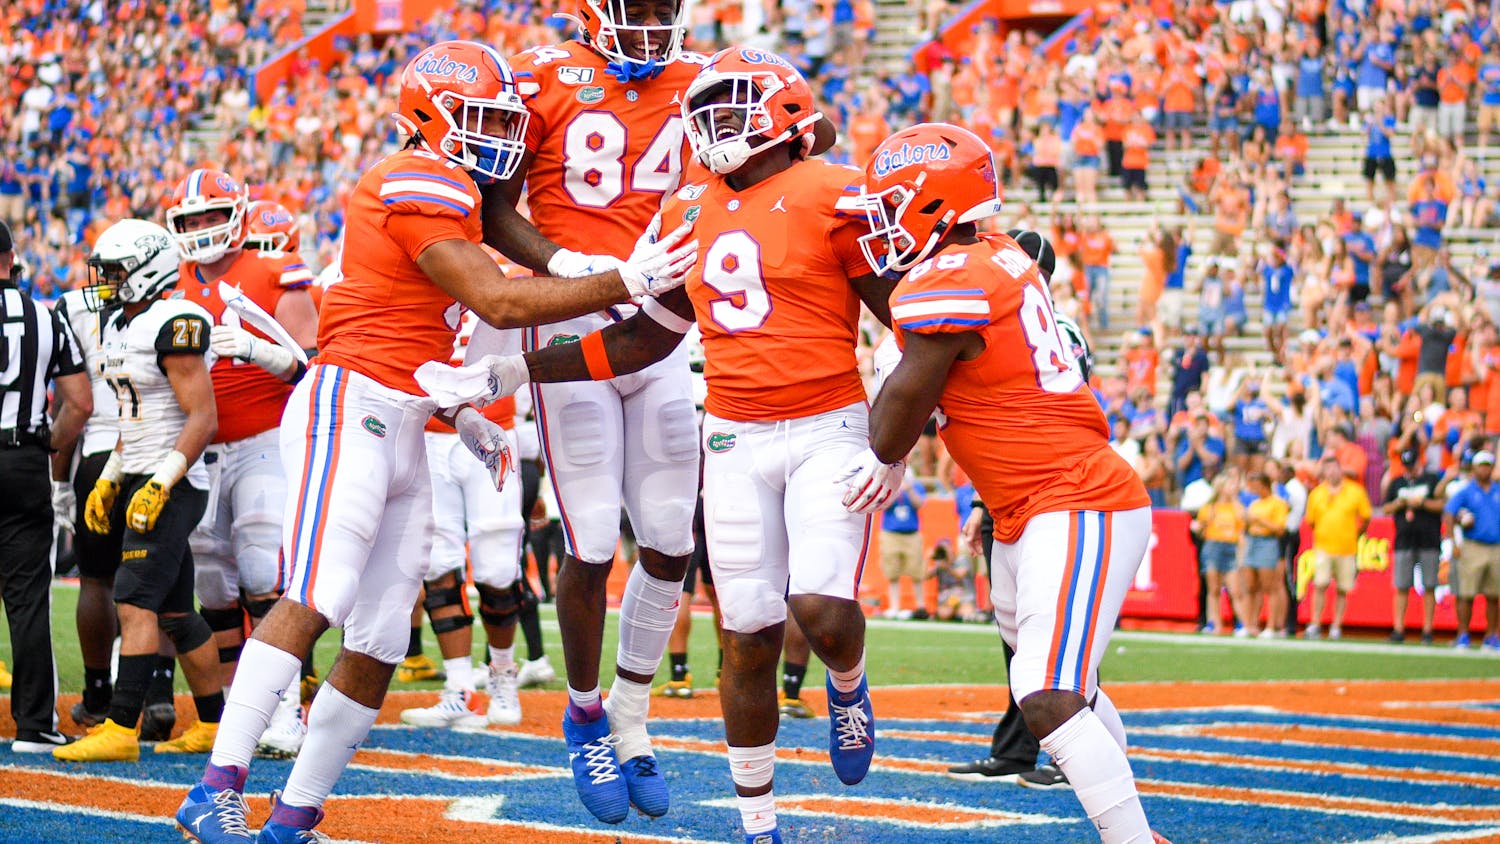 This week's episode of the HBO show "24/7 College Football" follows the Gators as the prepare to play the Towson Tigers.